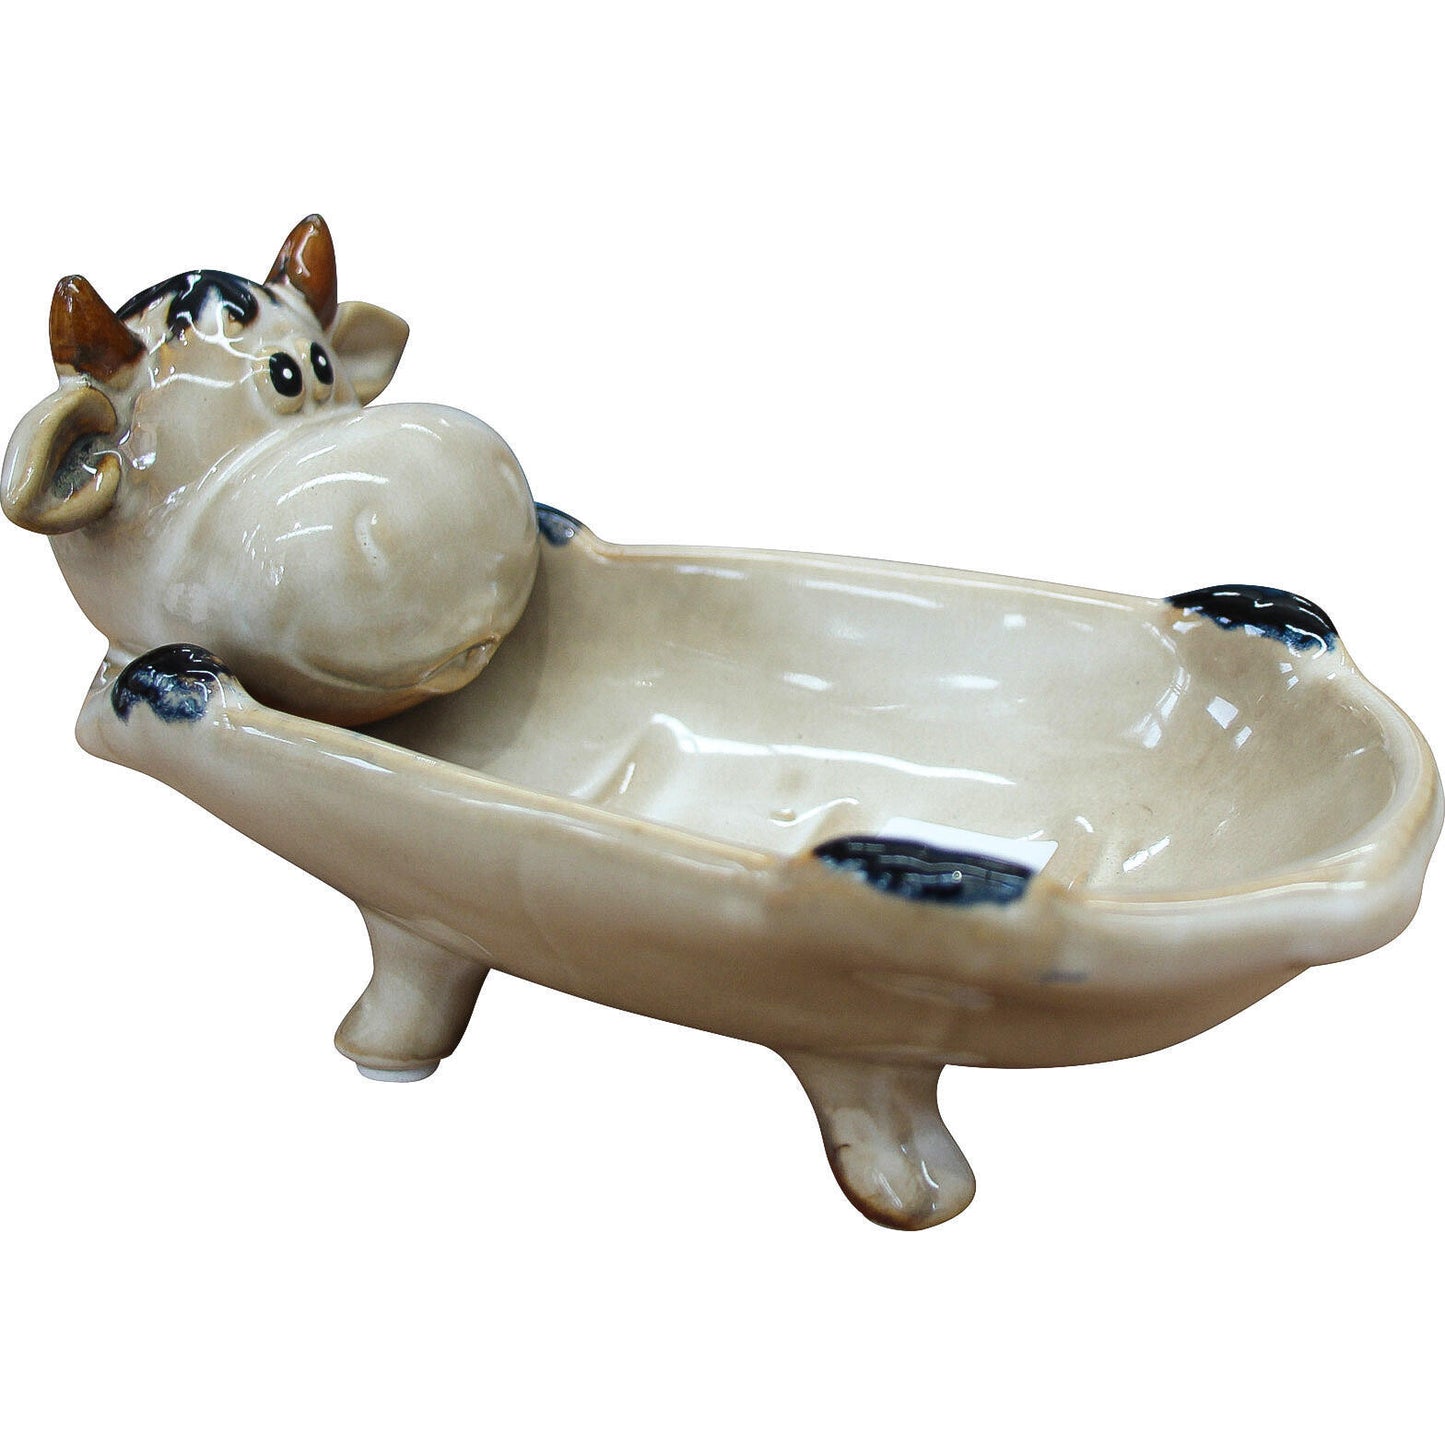 Cow Soap Dish Ceramic Country